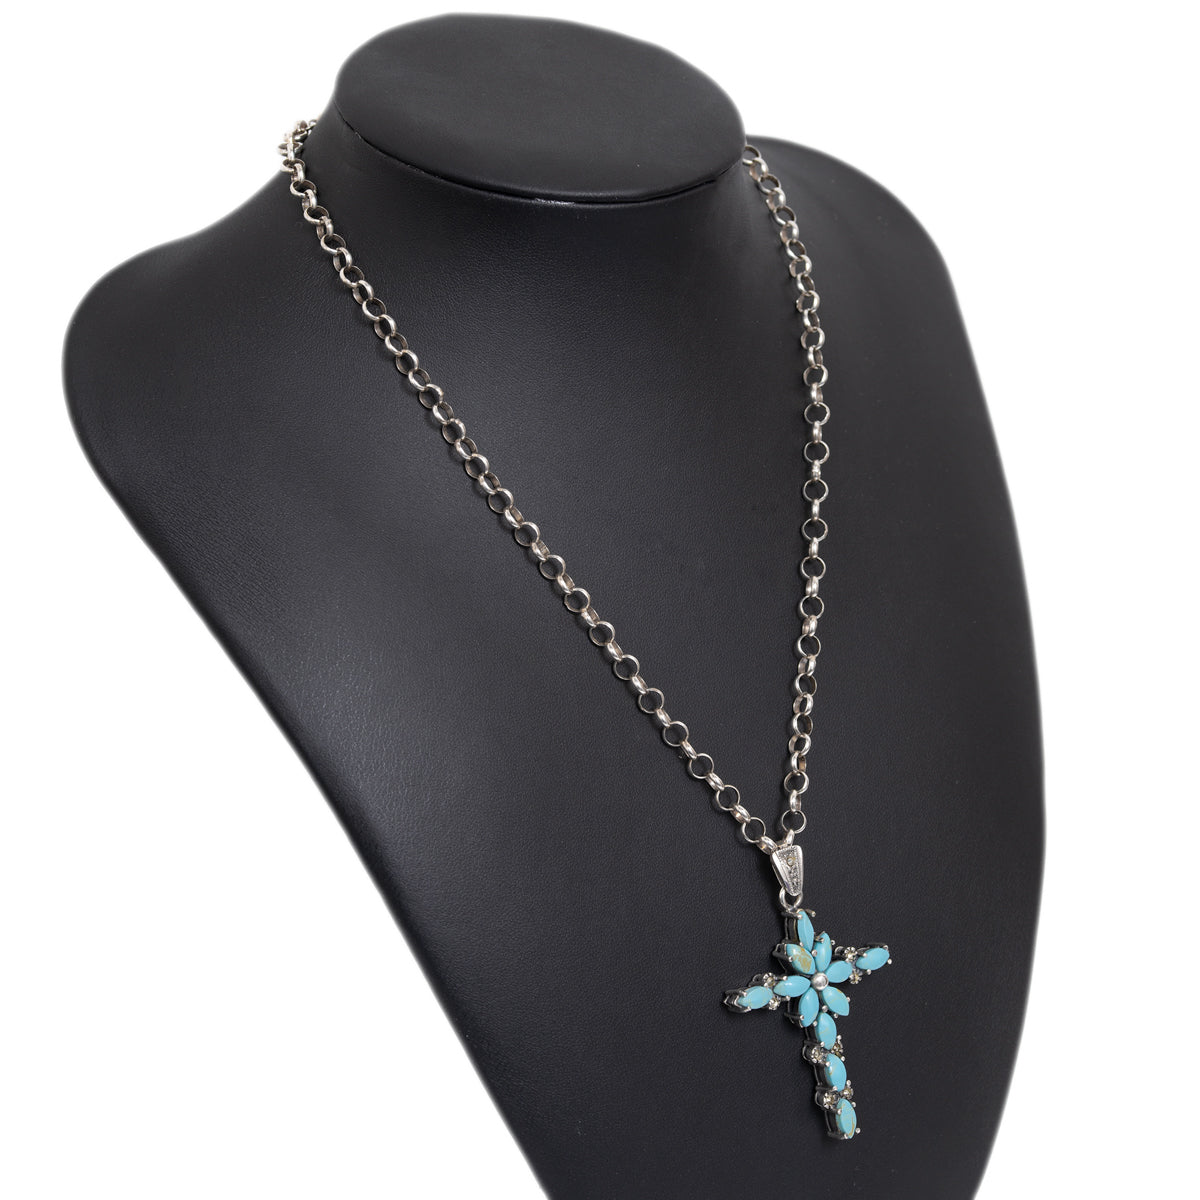 Vintage Sterling Silver Turquoise & Marcasite Cross Pendant/Necklace With Belcher Chain (Code A1076)